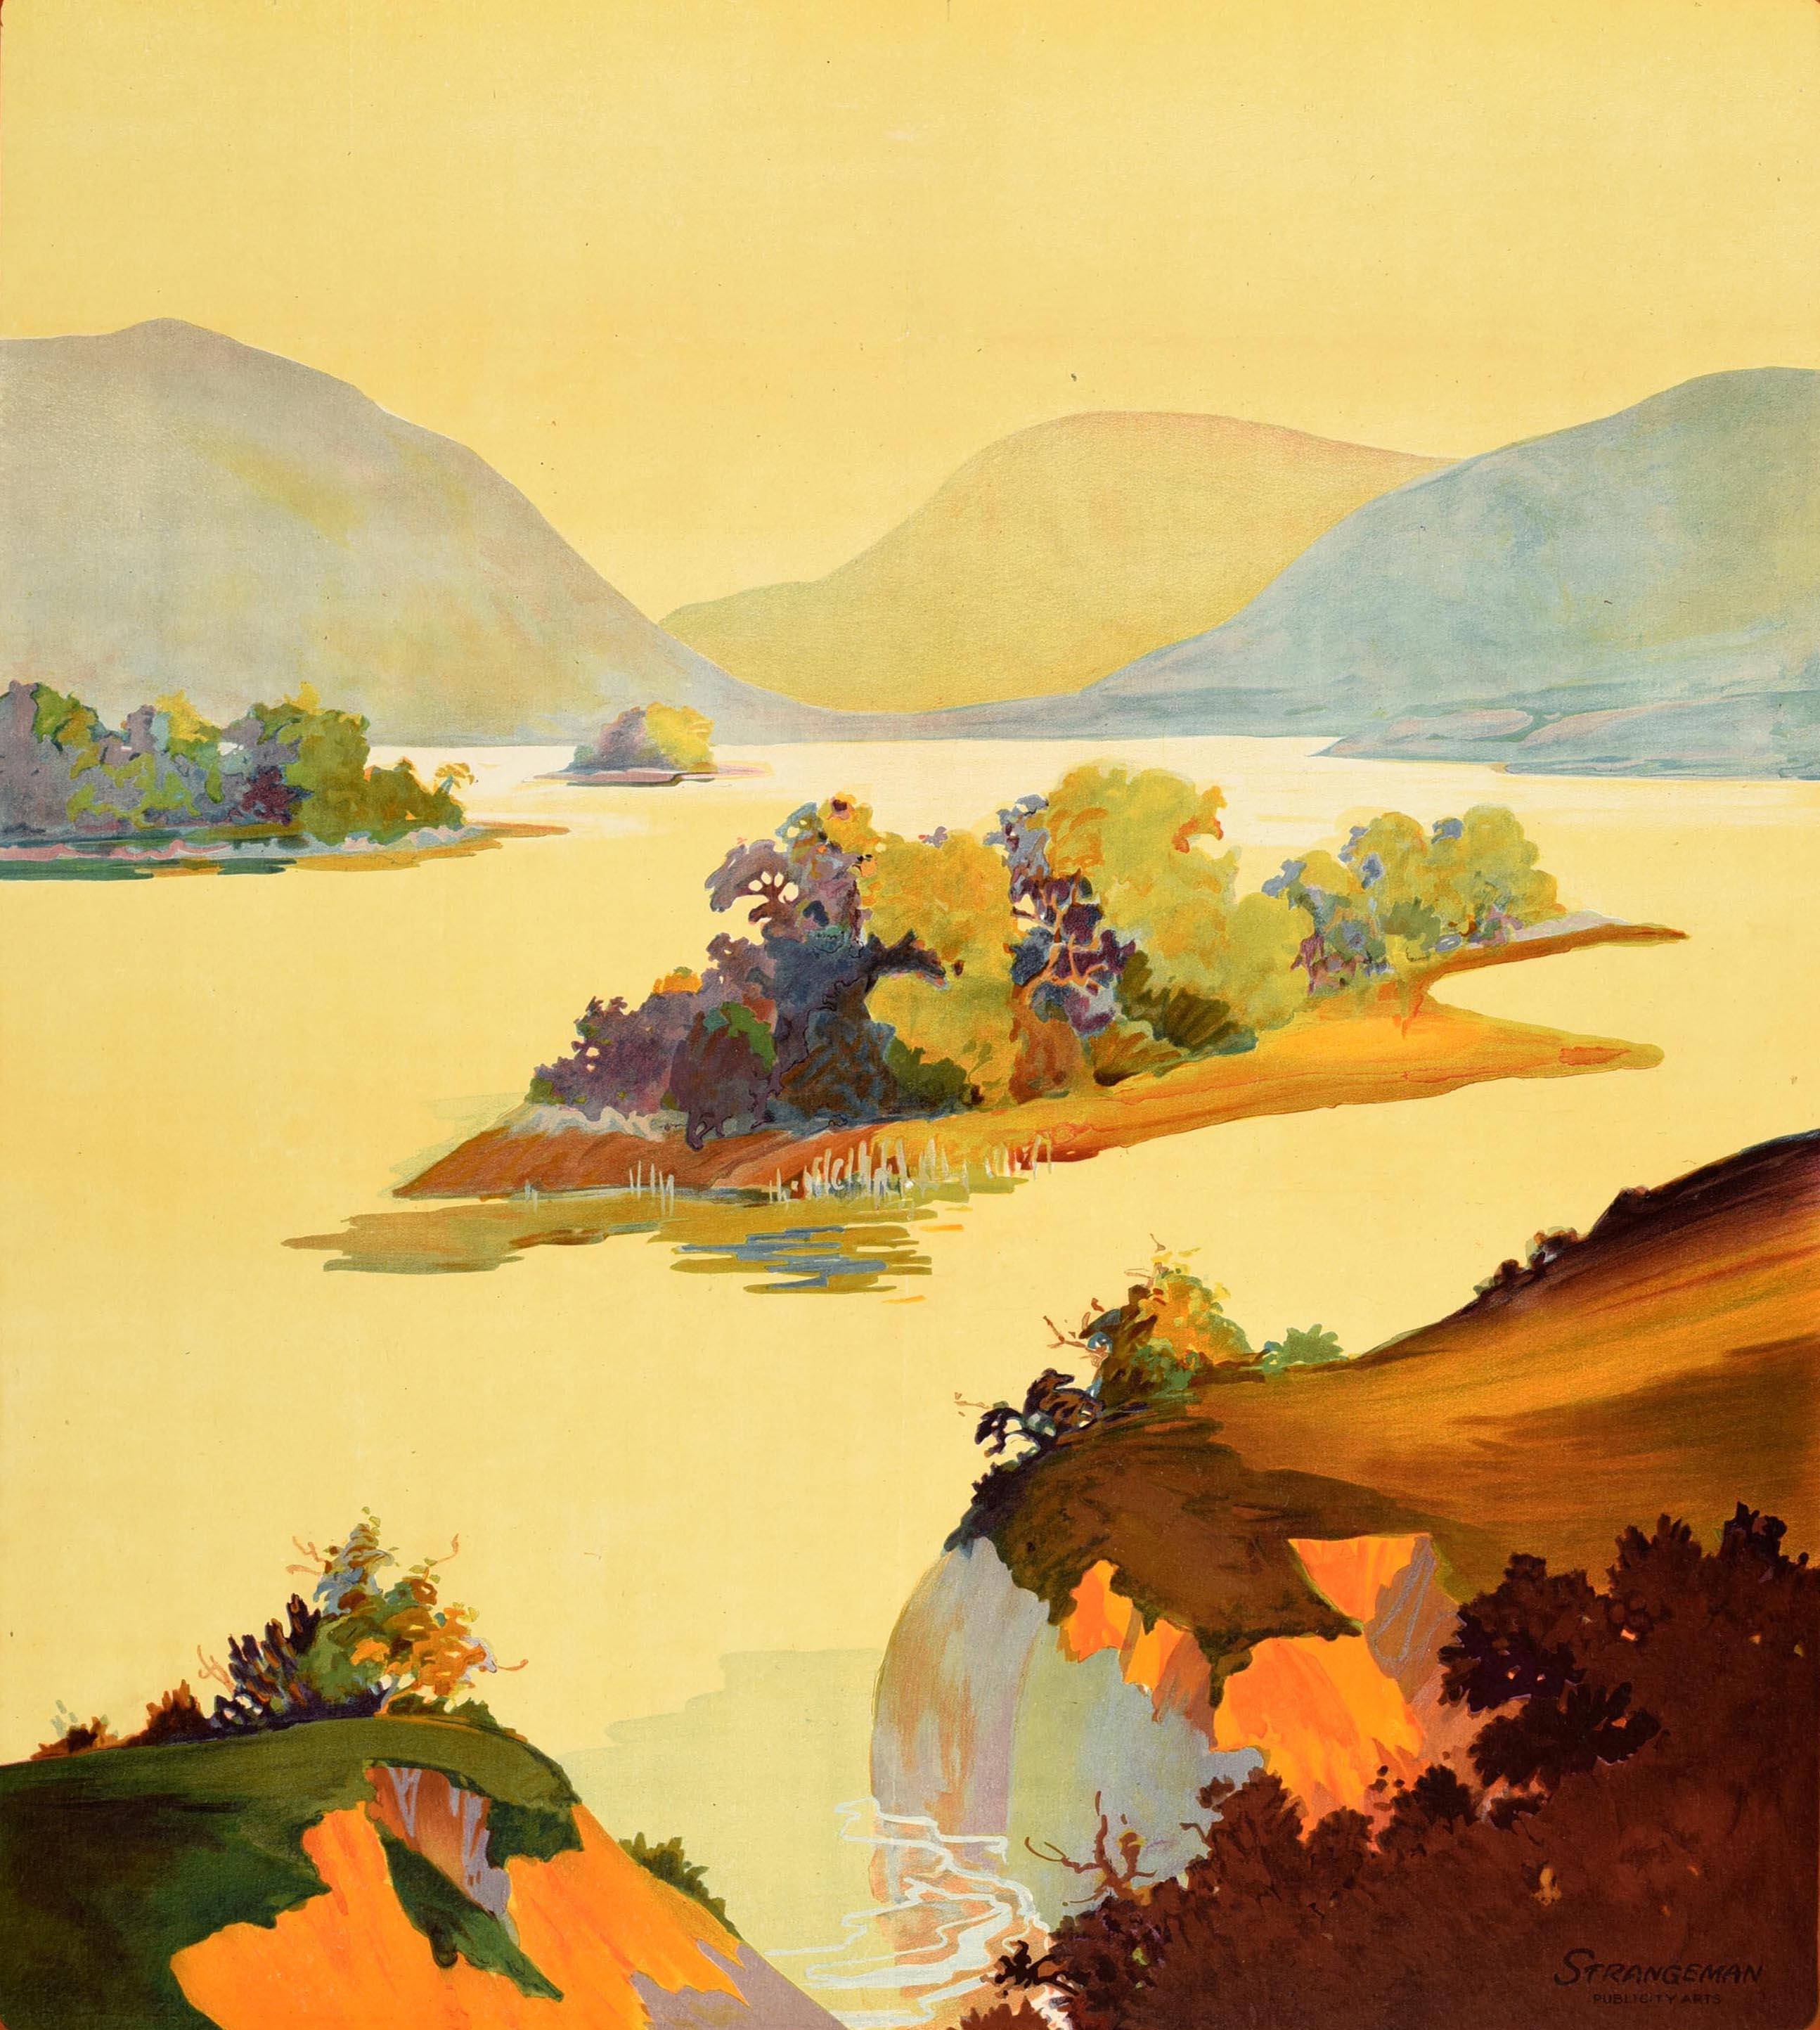 Original vintage travel poster for Ireland - Come Back to Erin - by Anchor Line New York and Londonderry - Design features a lake scene with rolling hills in the background framed by a maroon border with white and green lettering. Printed in Great